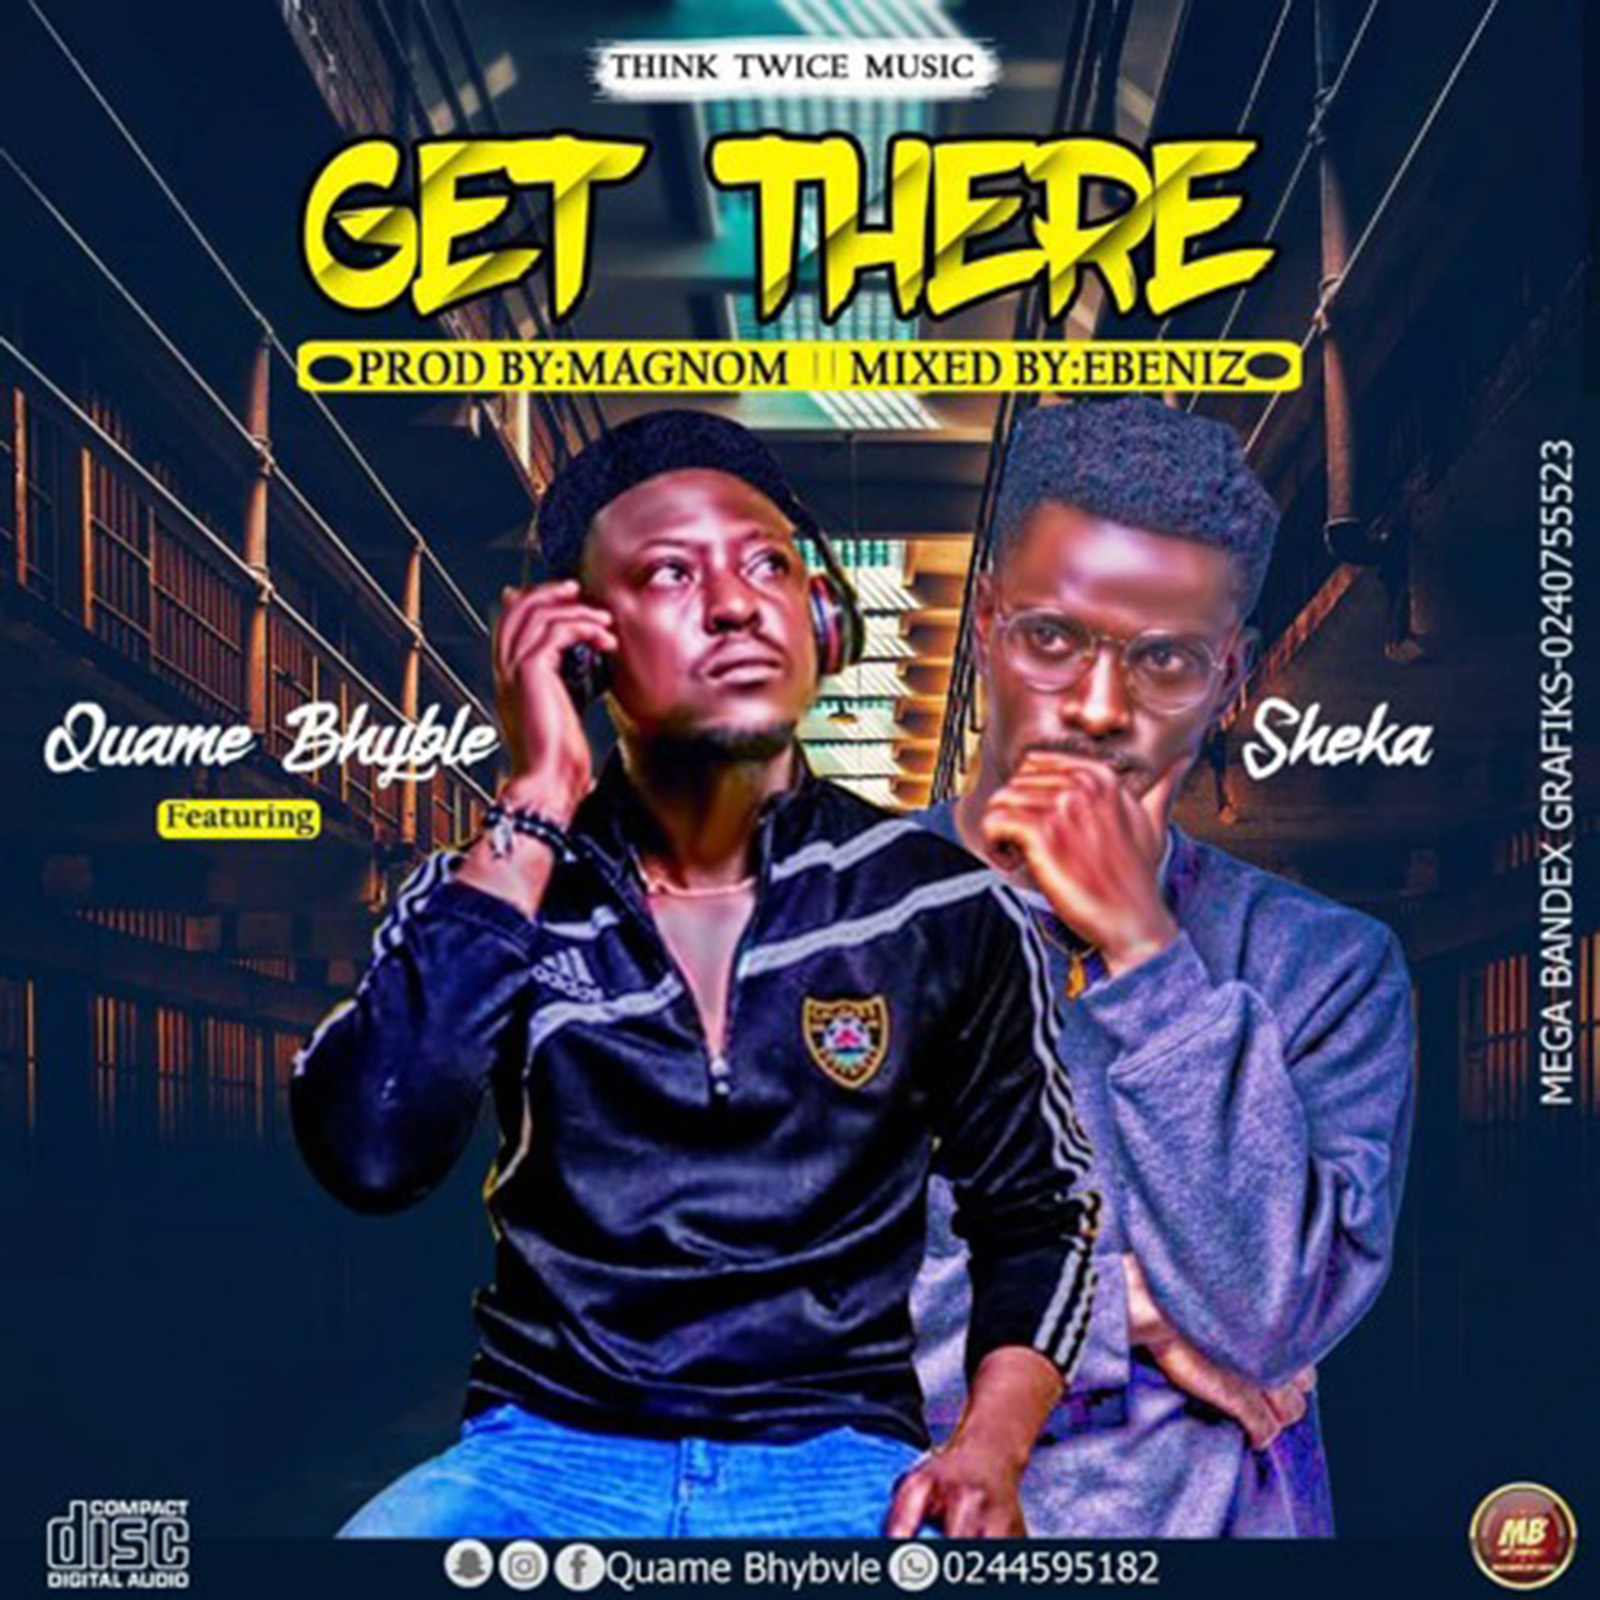 Get There by Quame Bhyble feat. Lil Shaker